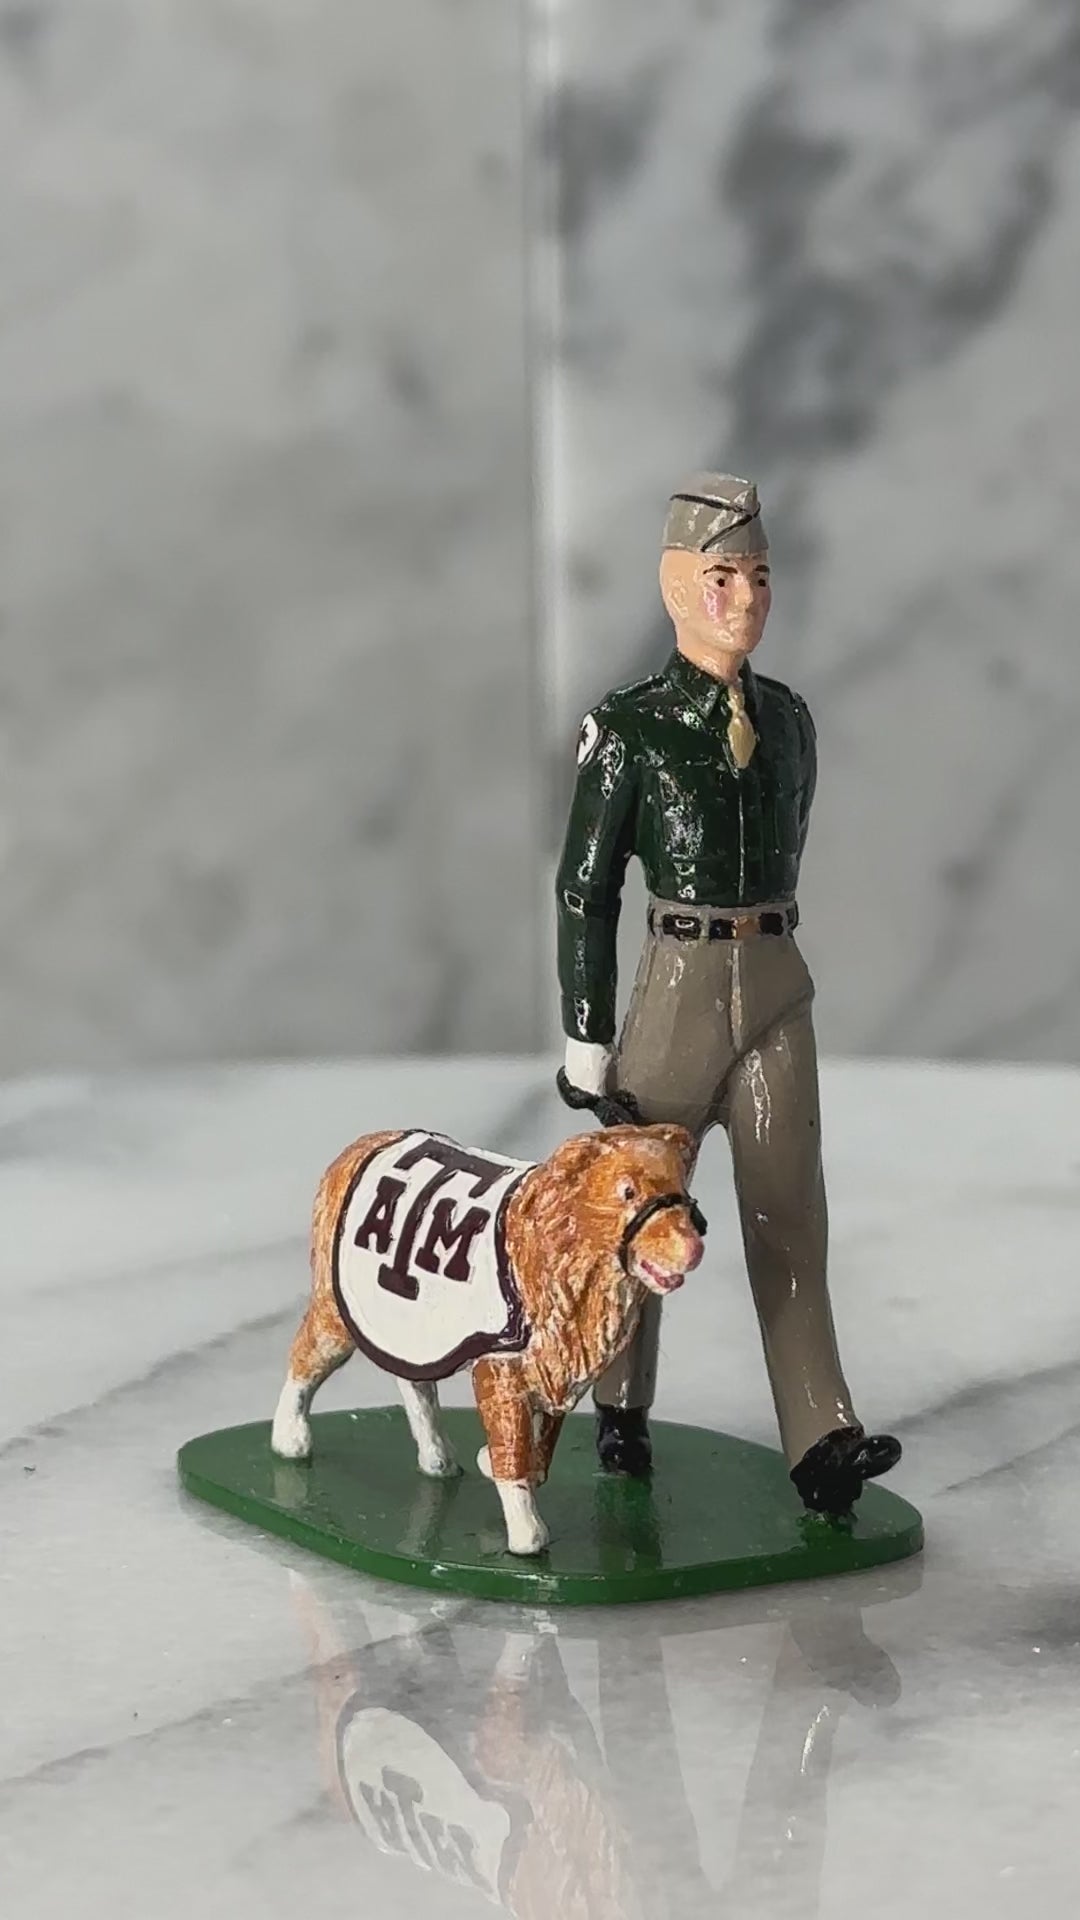 360 view of Collectible toy soldier army men Texas A&M Mascot and Handler.